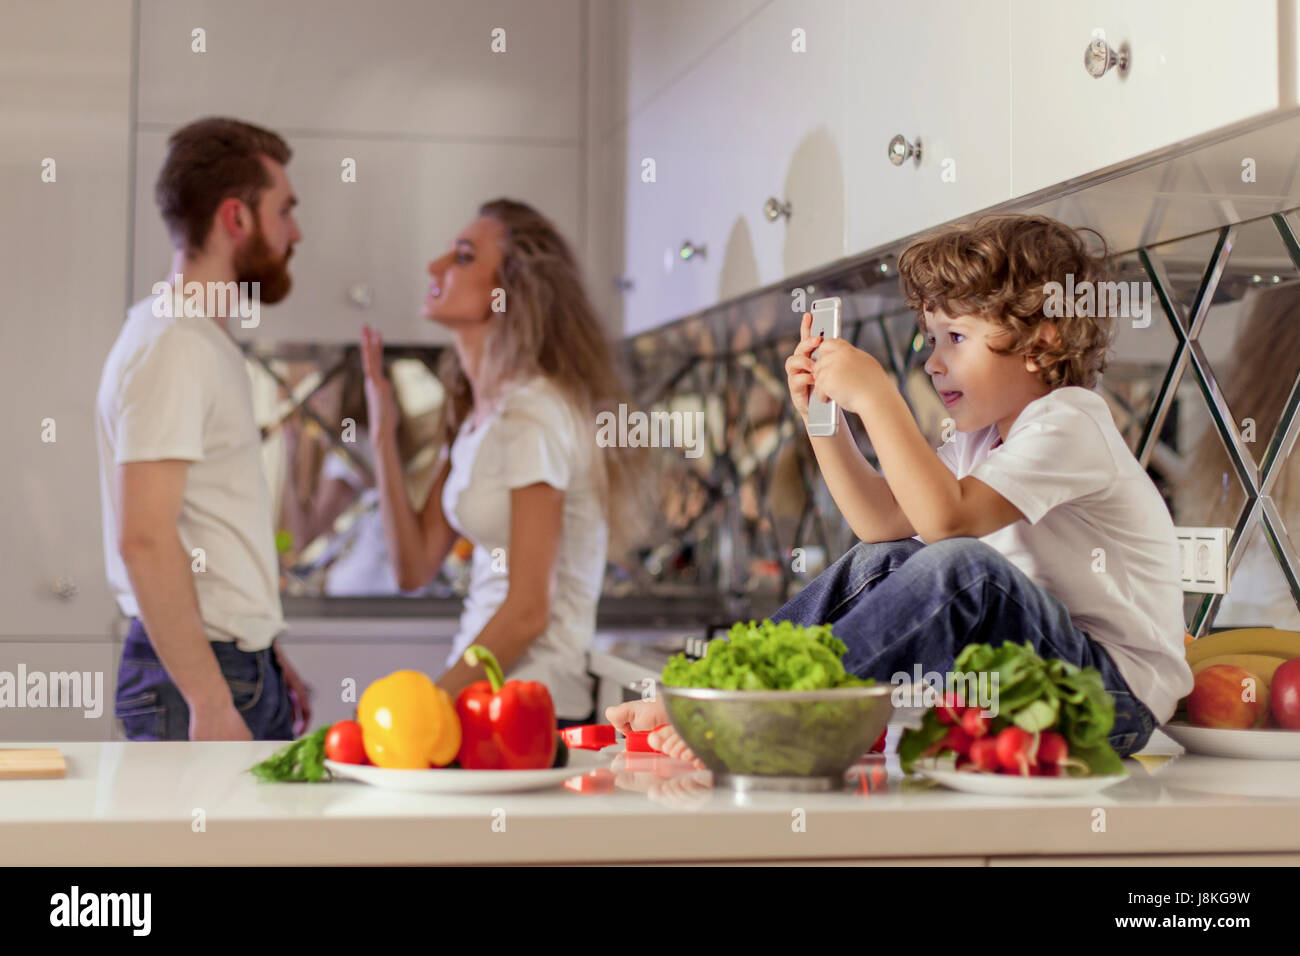 Family conflict photo. Small boy looking at the phone screen while parents have conflict. Stock Photo